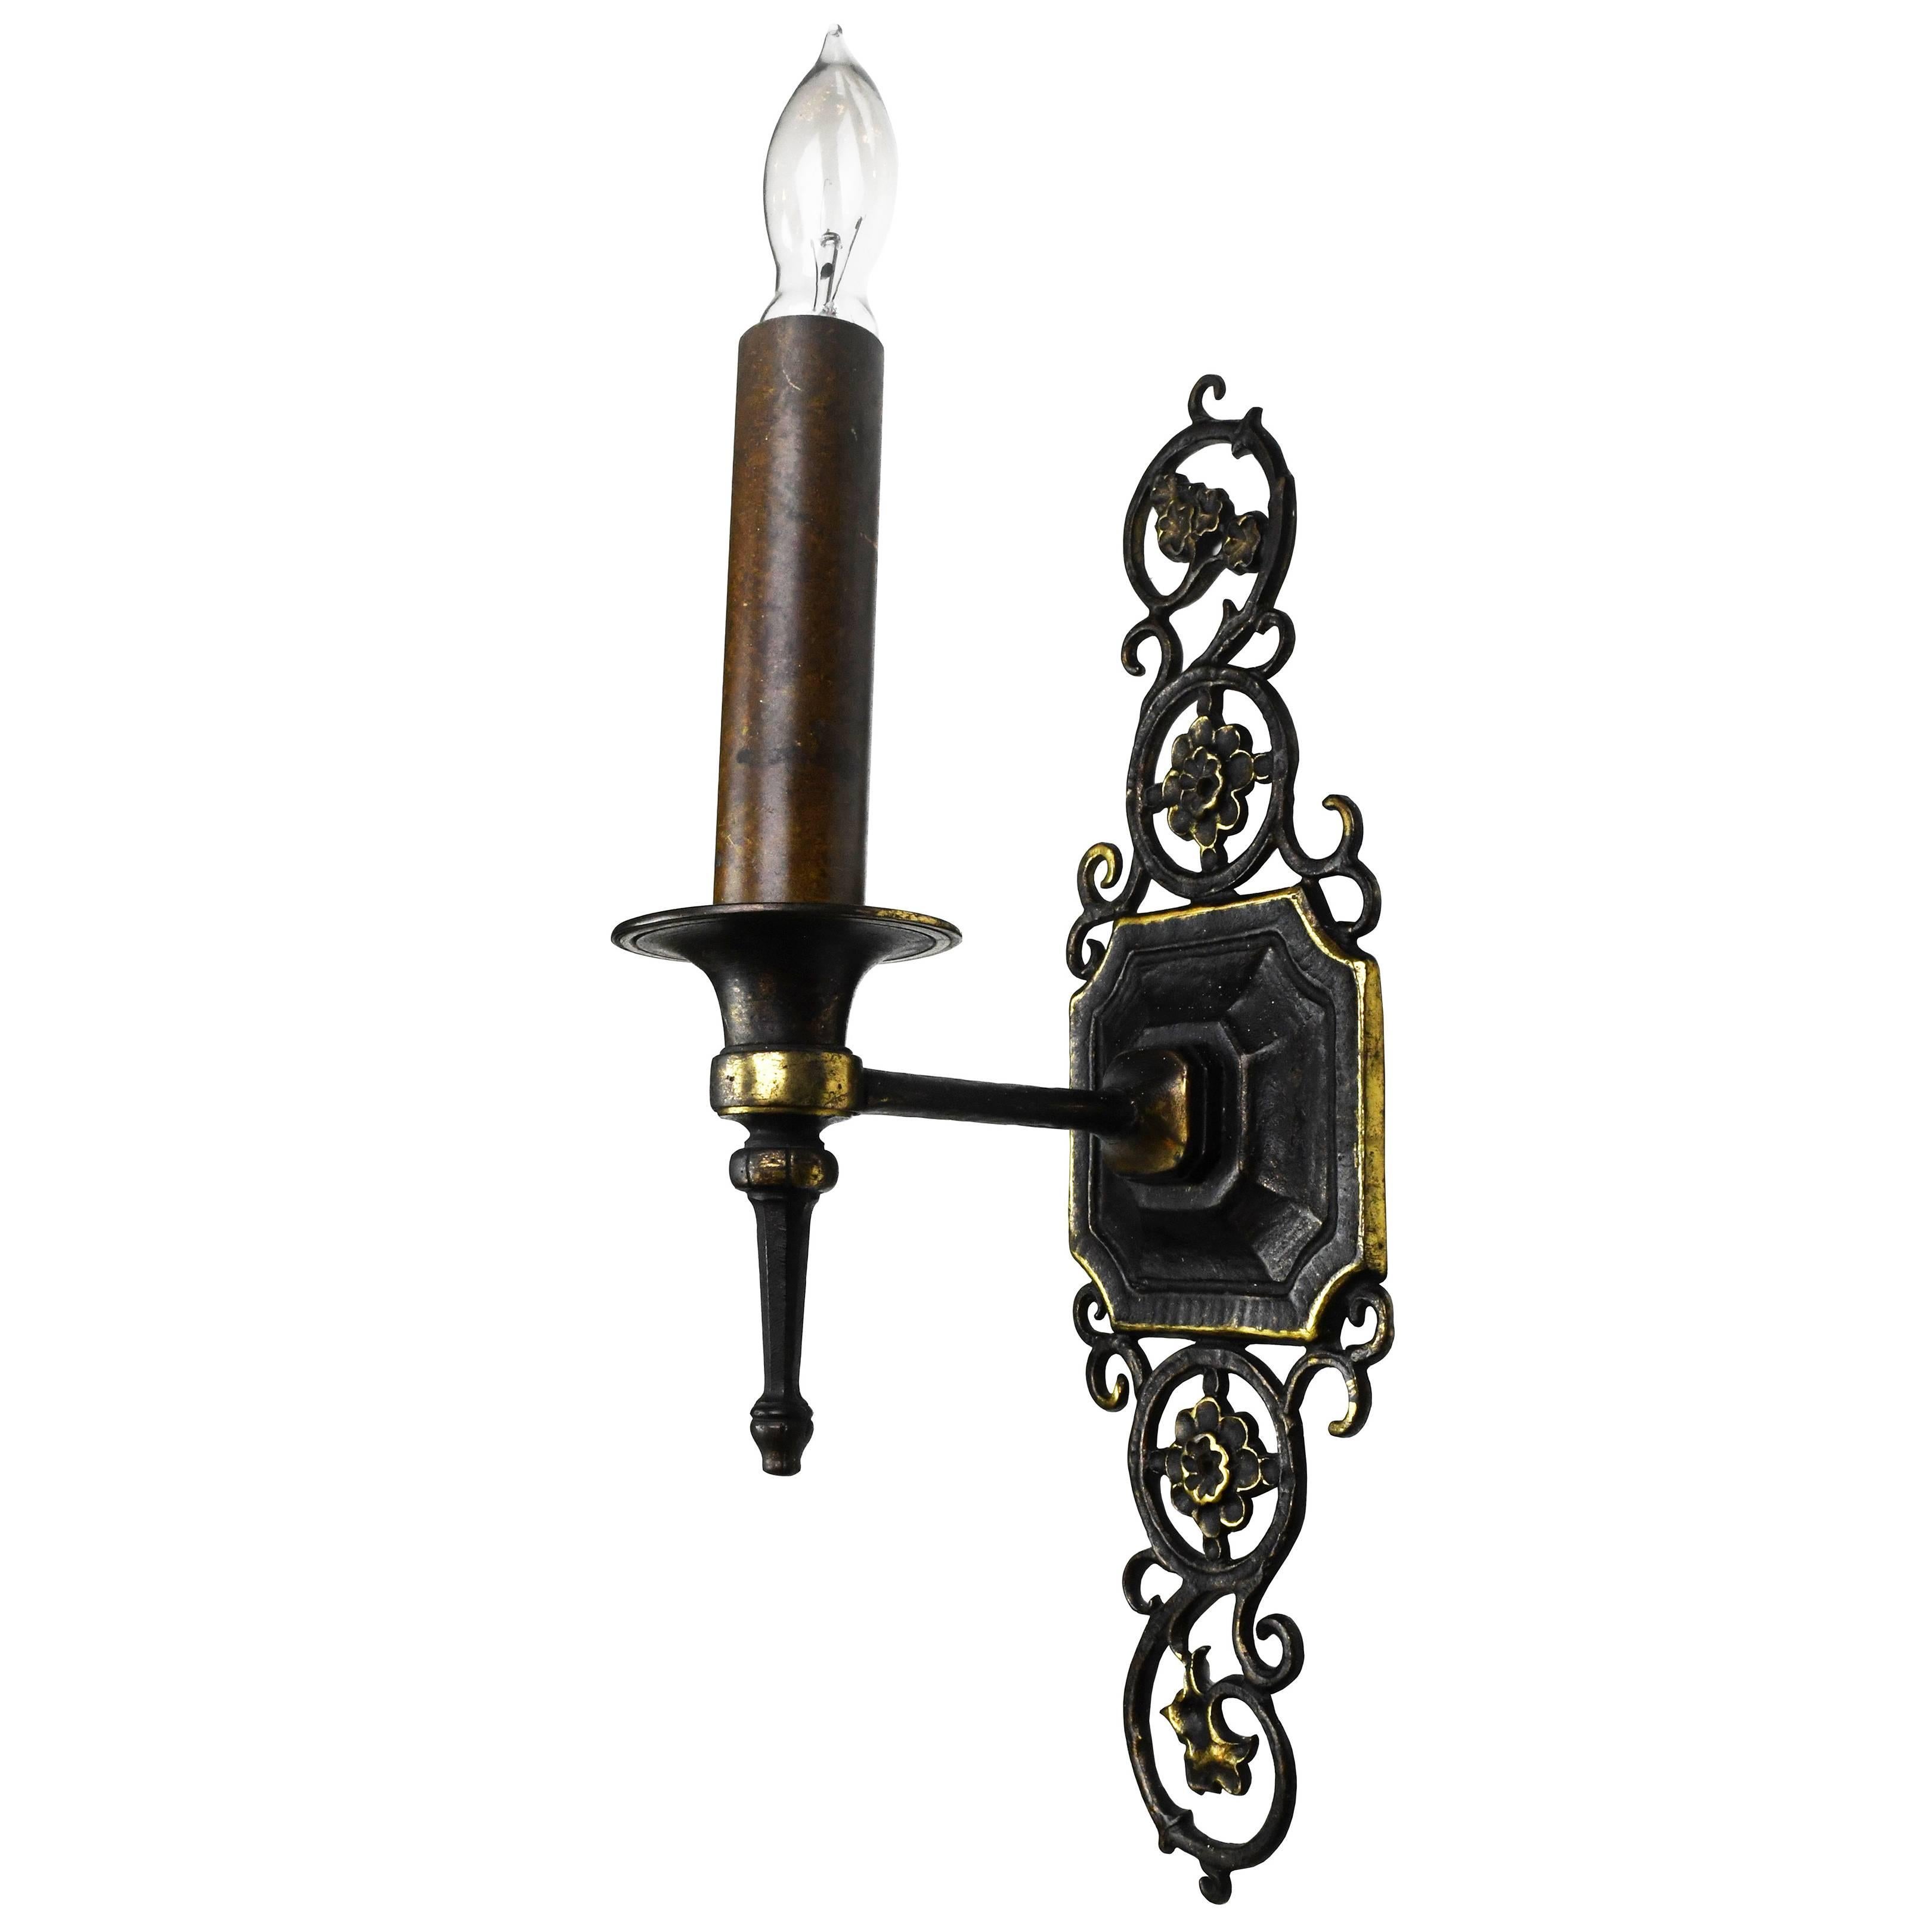 Oscar Bach Single-Candle Sconce - two available